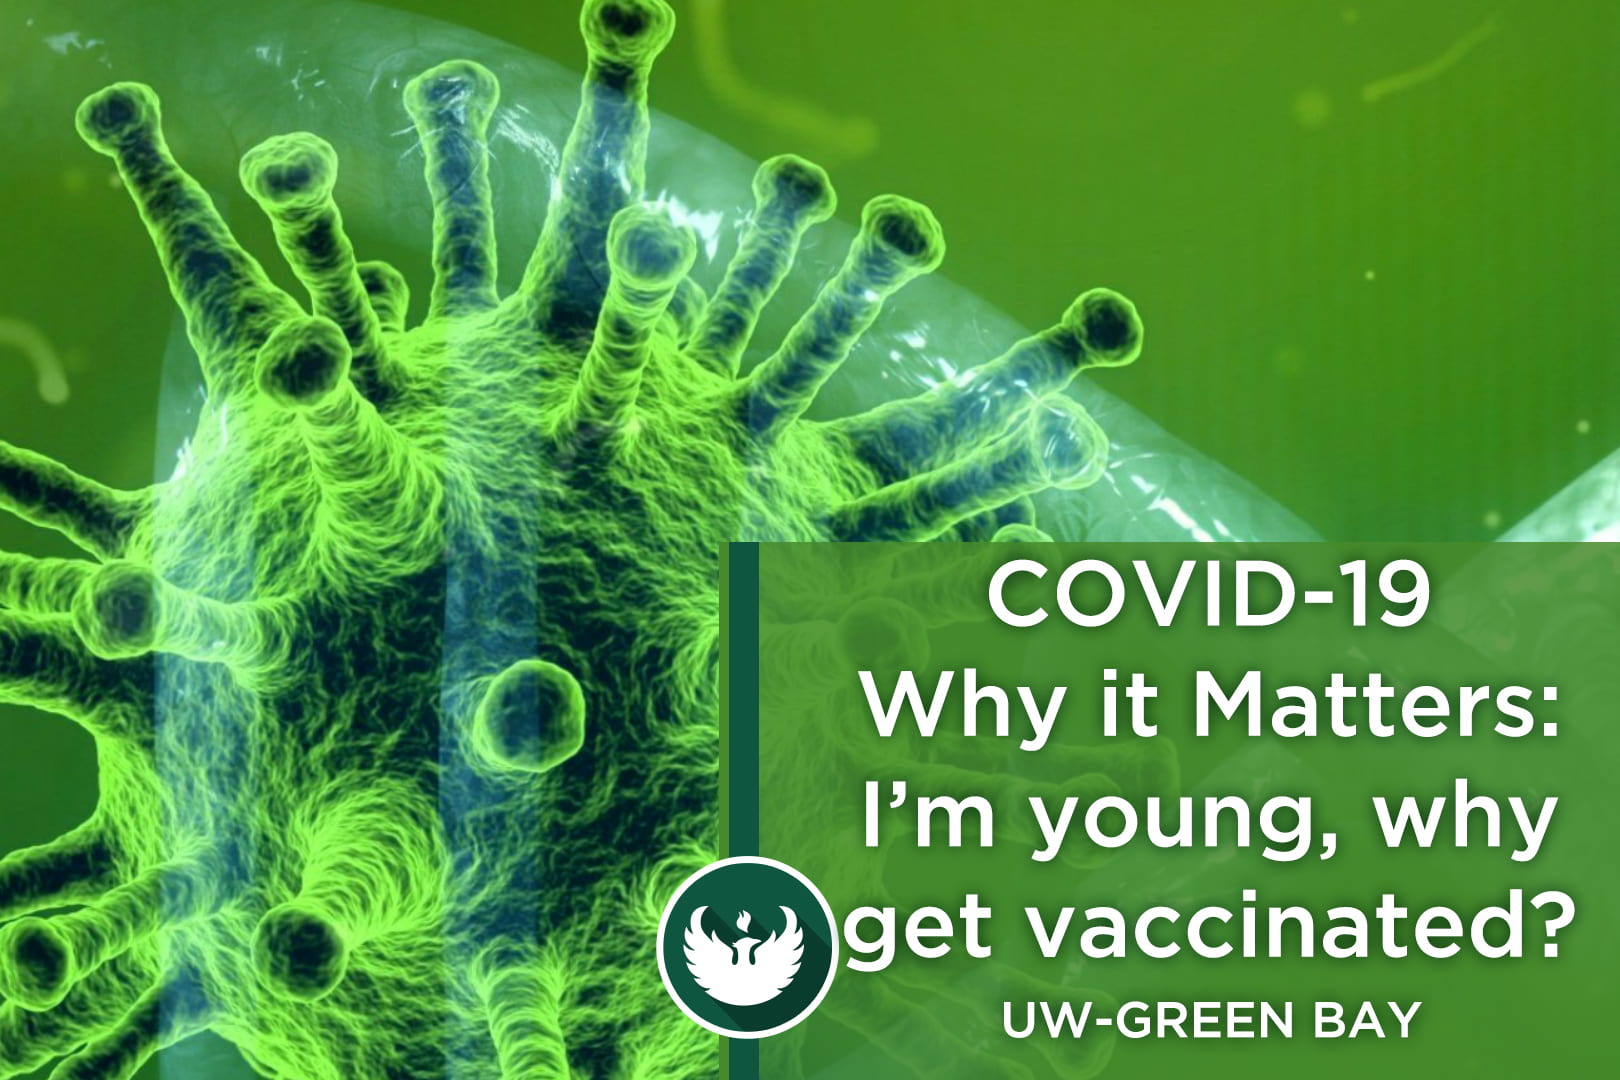 Photo of the COVID-19 virus, enlarged under a microscope with the text, "COVID-19 Why it Matters: I’m young, Why get vaccinated?"